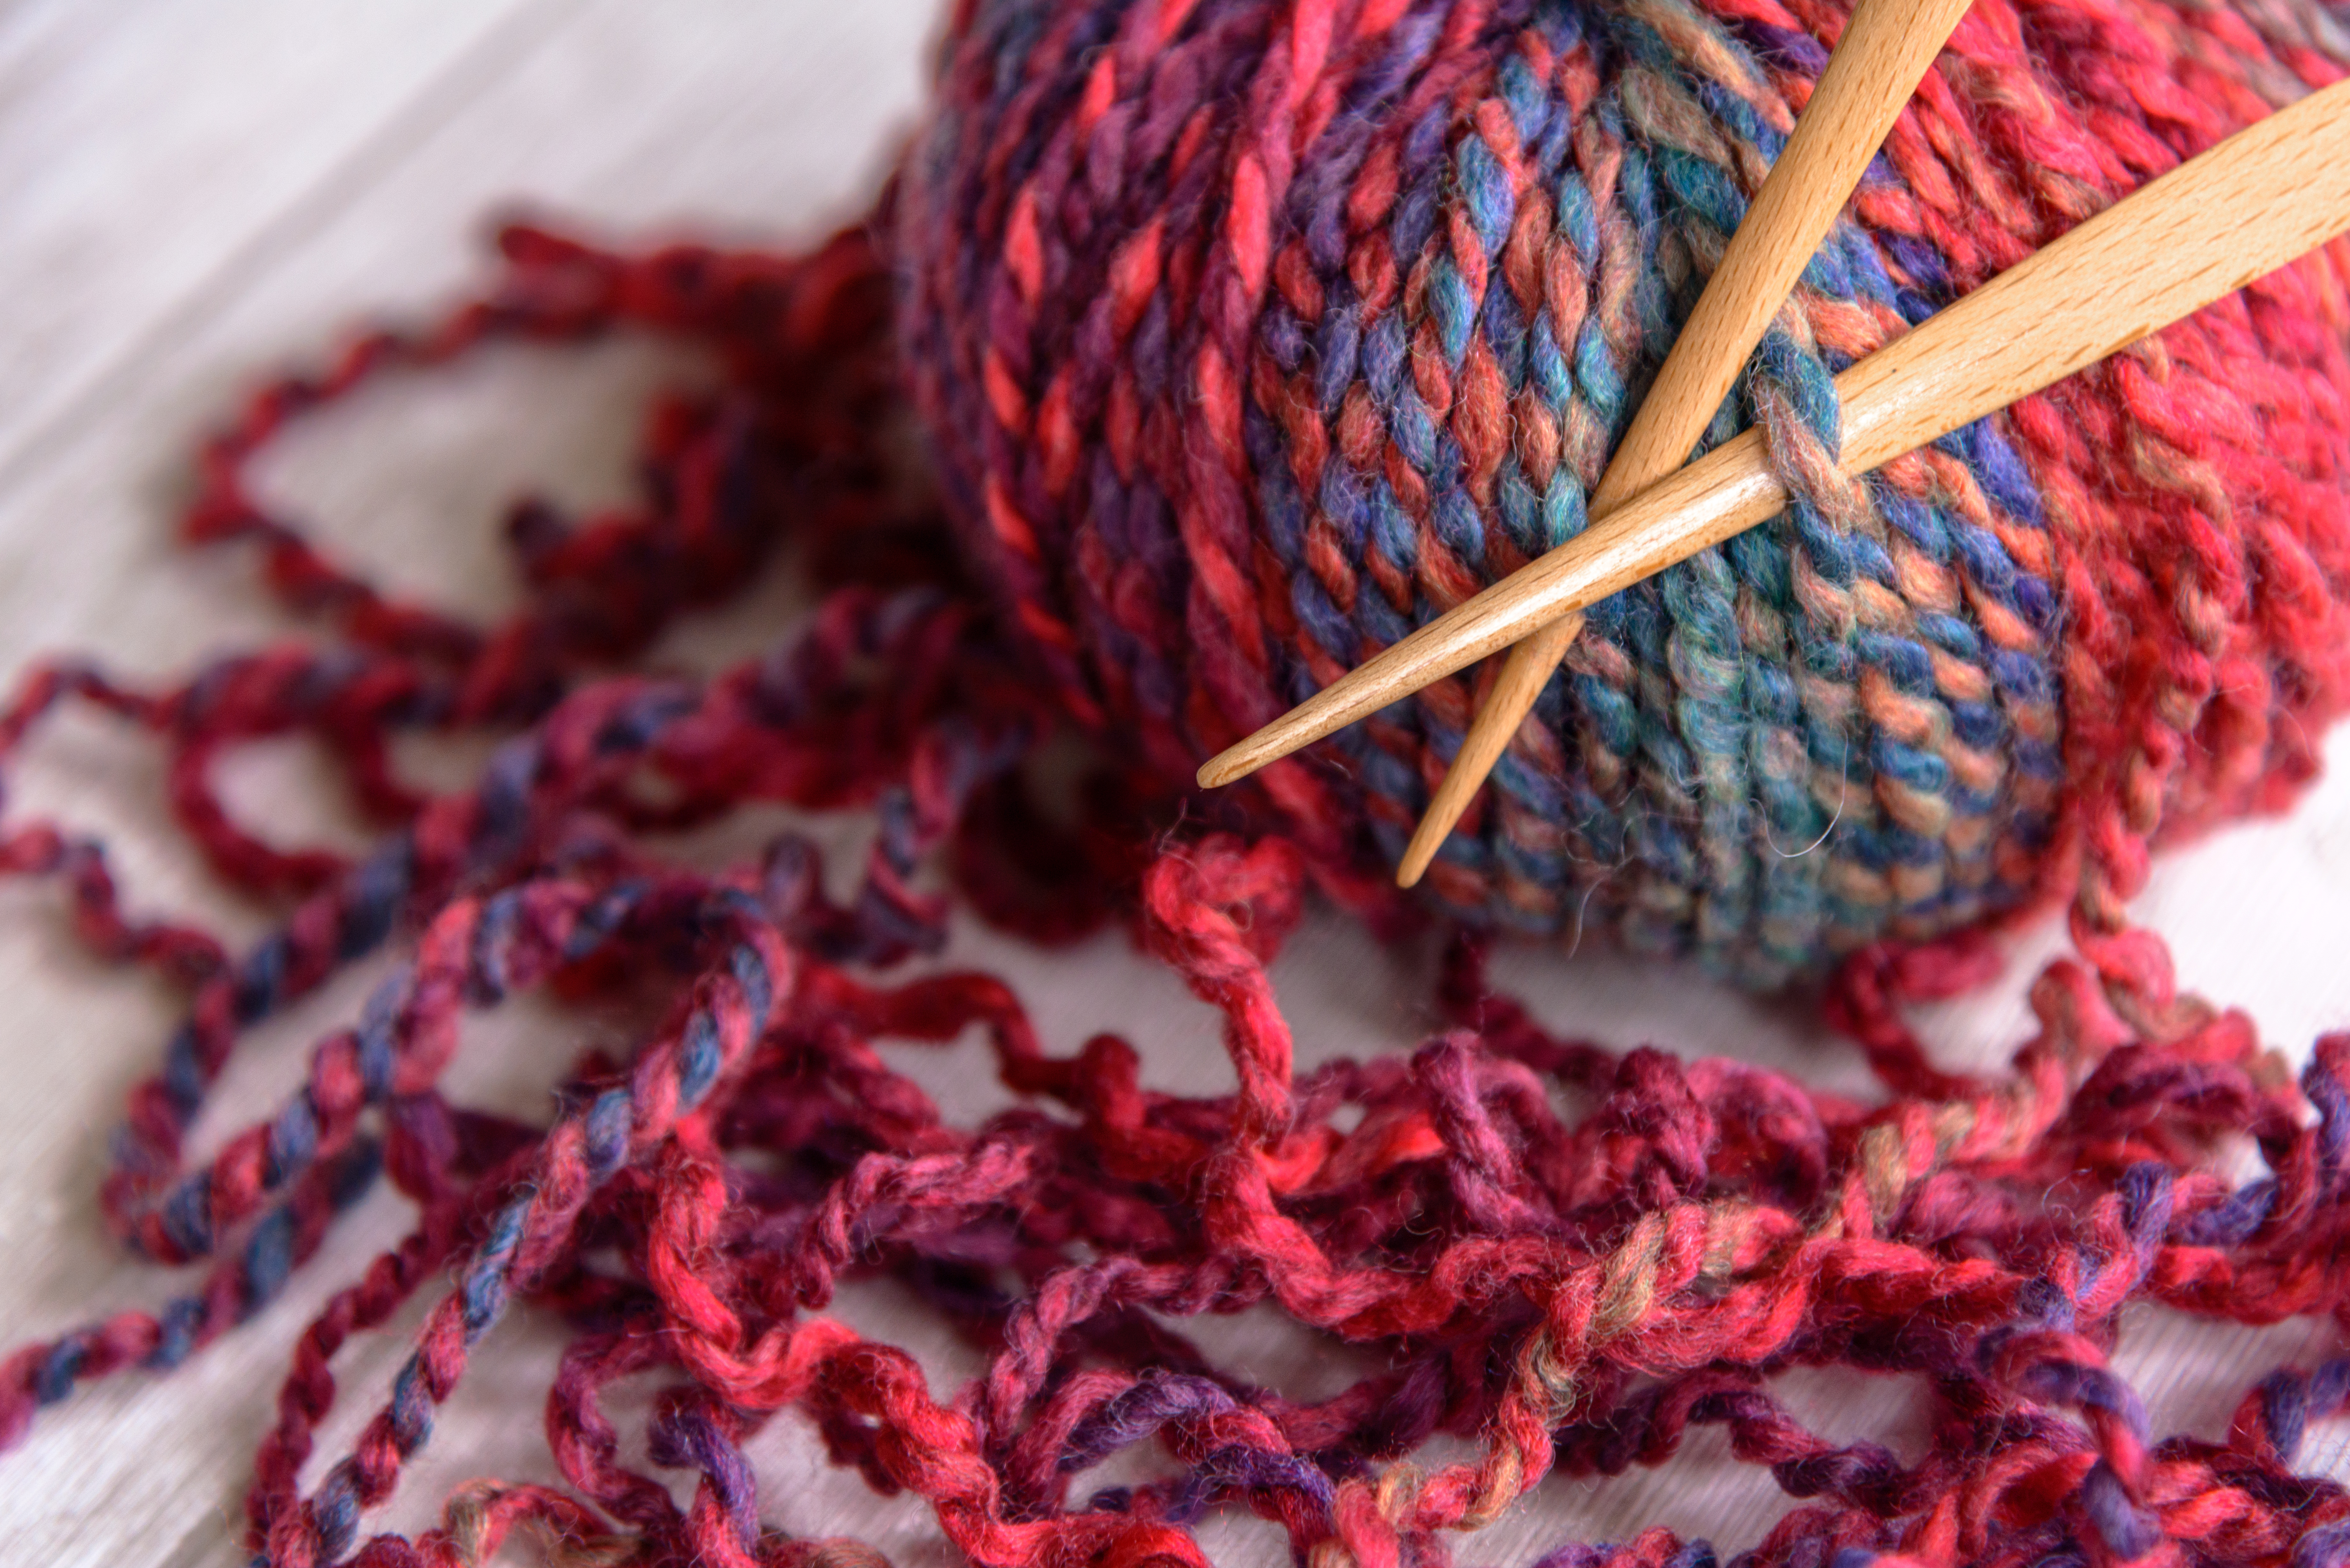 Popular Knitting Patterns This Knitting Group Just Banned Posts Supporting Trump Time